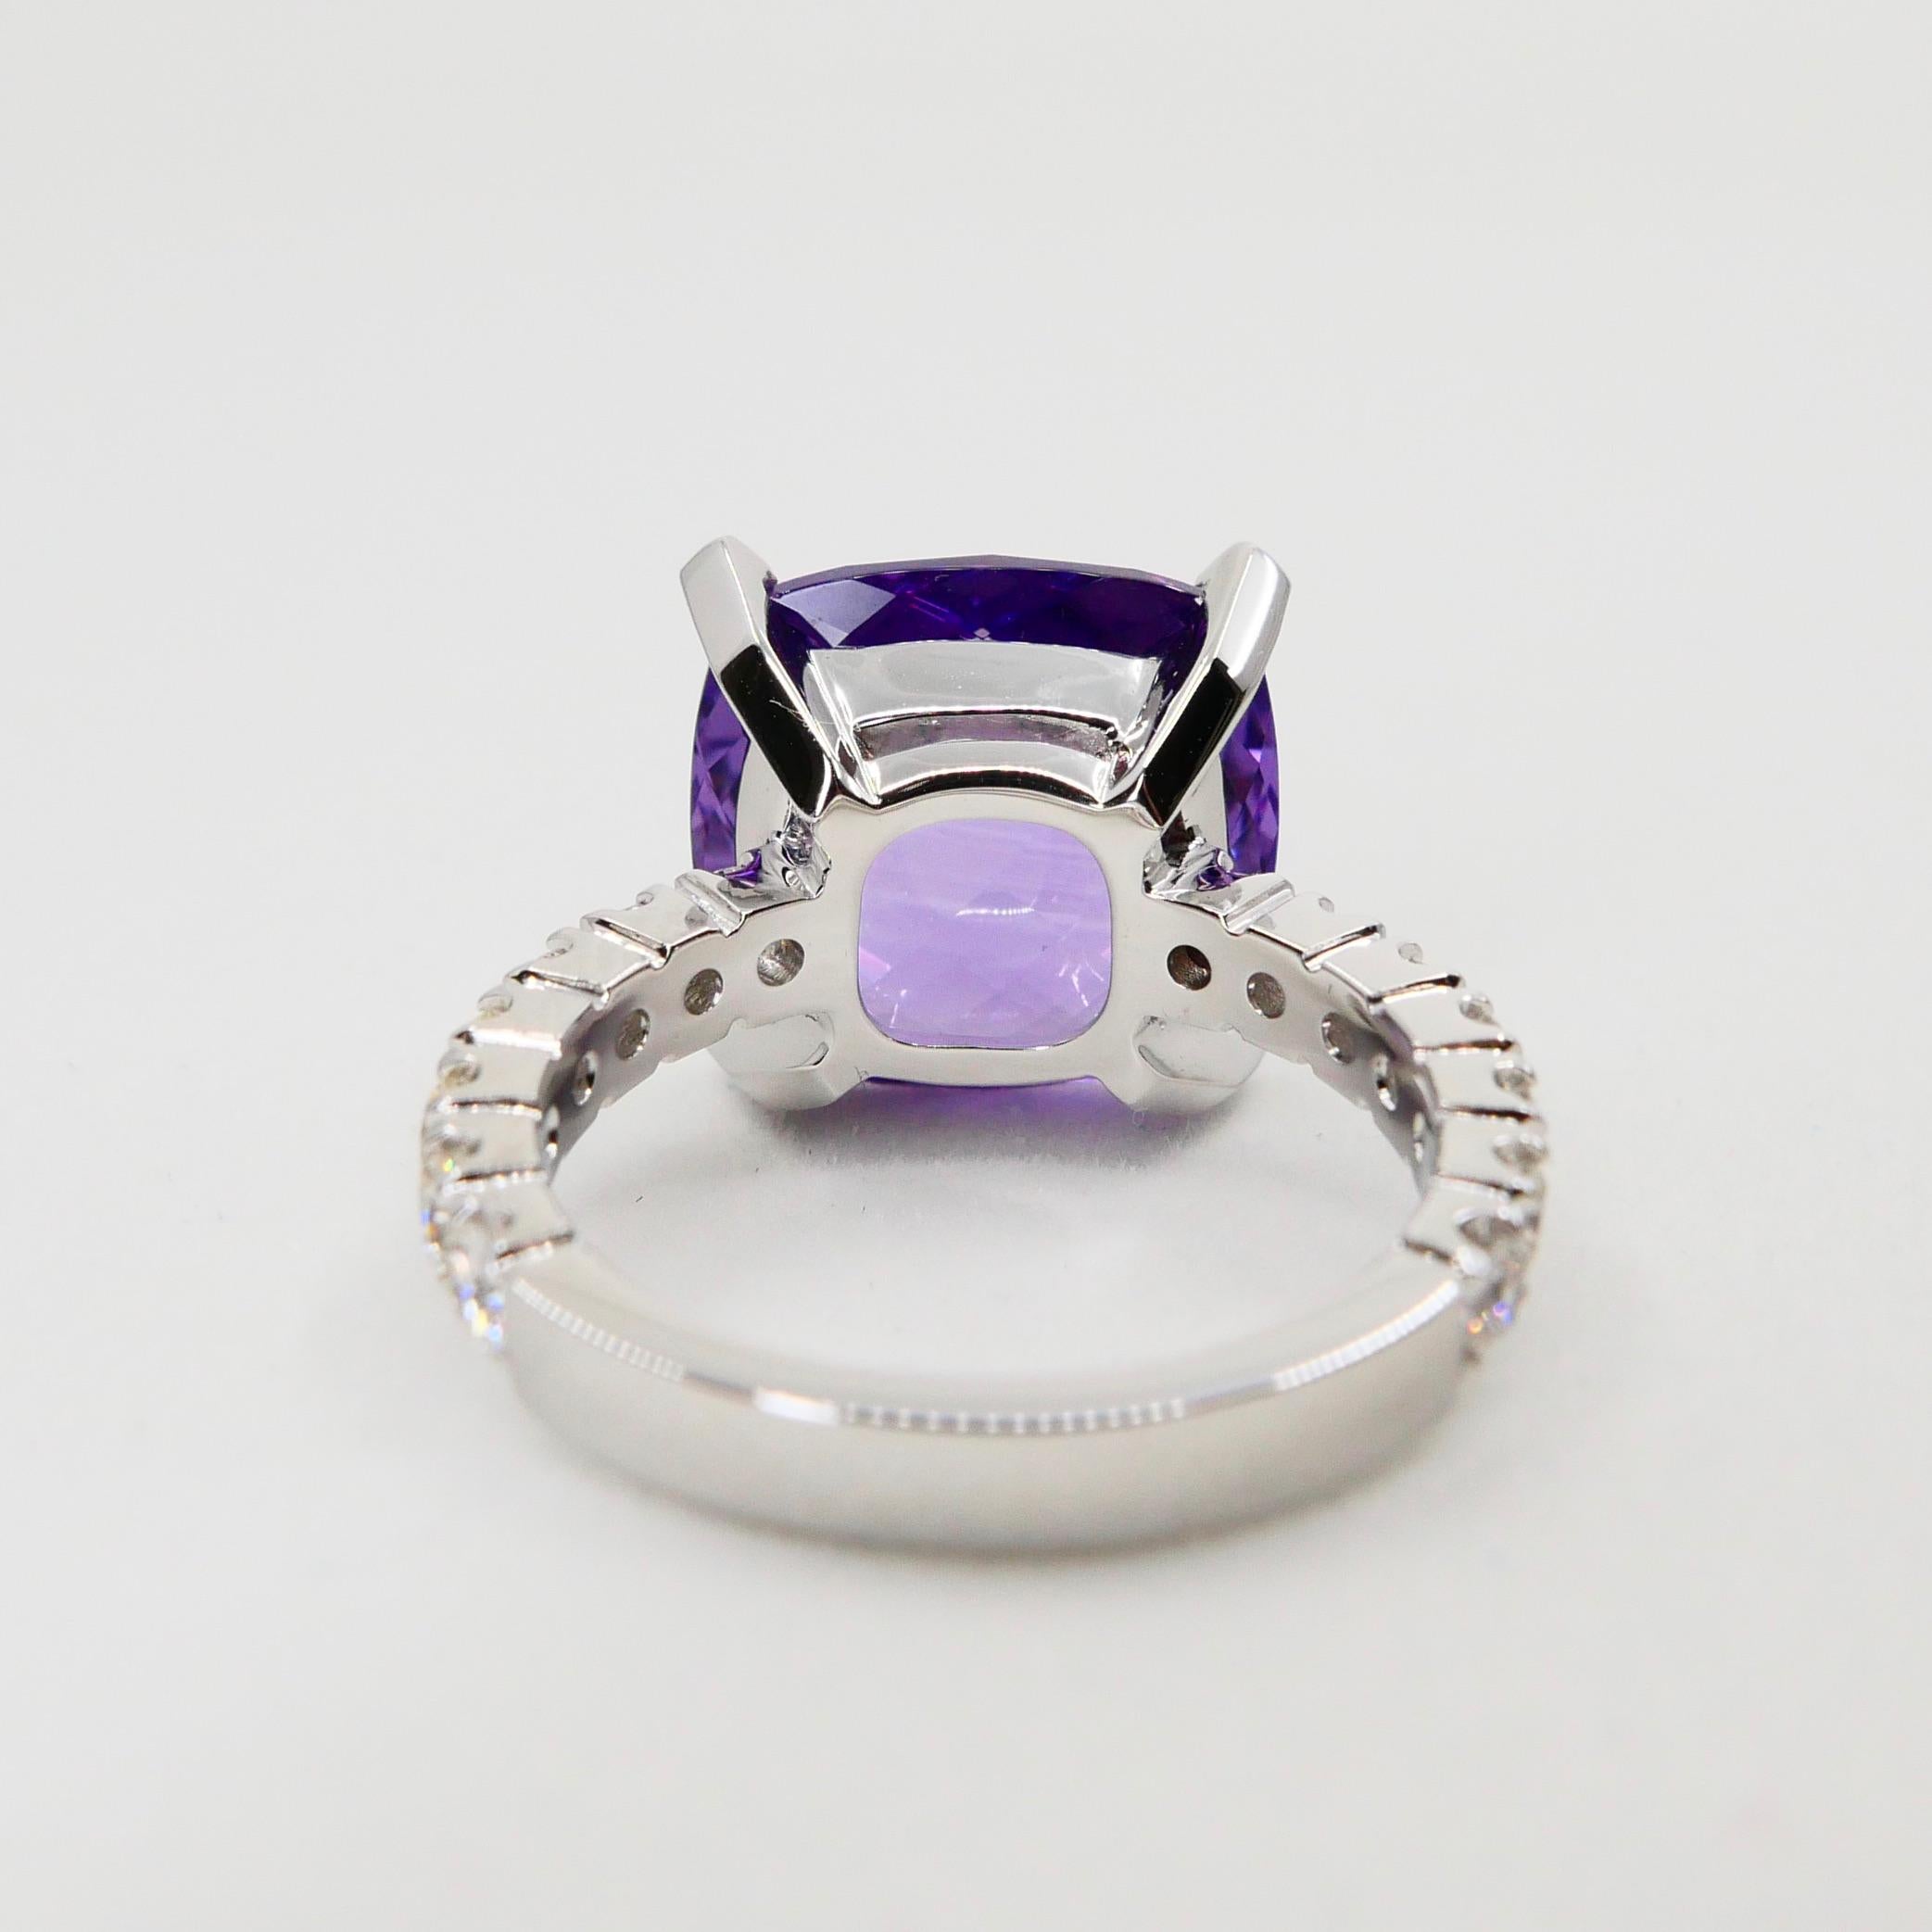 Women's 8.67 Carat Faceted Amethyst and Diamond Cocktail Ring, 18 Karat White Gold For Sale